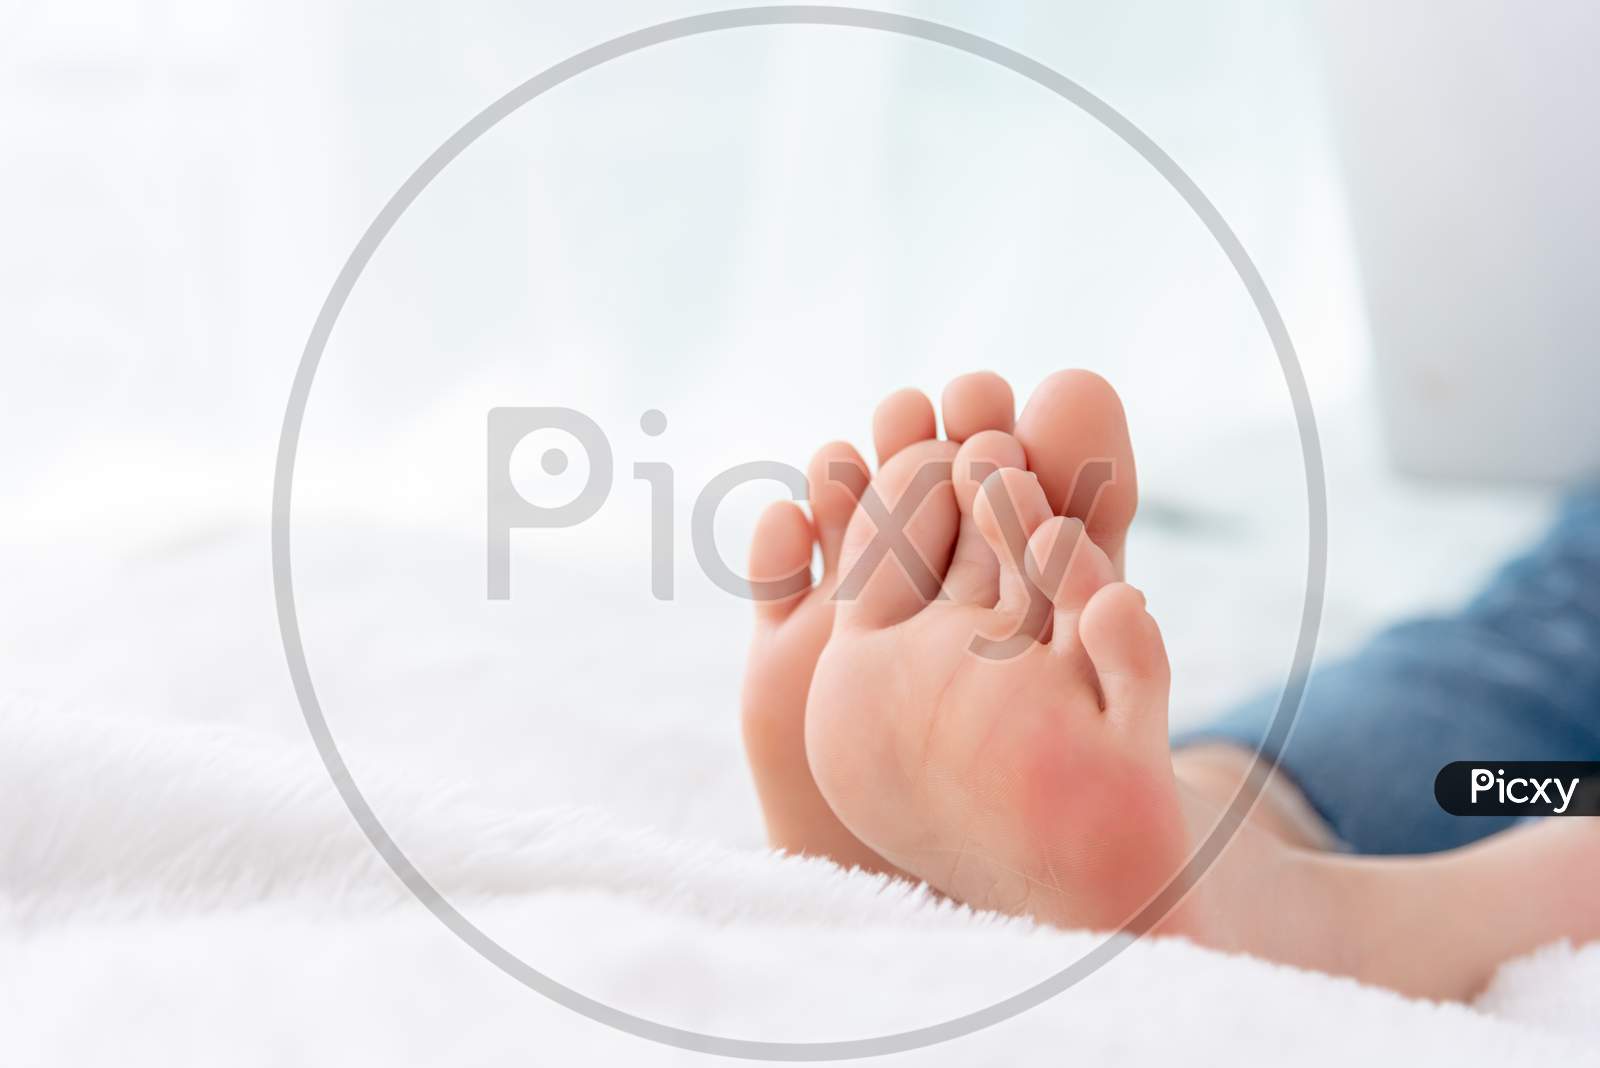 Closeup Woman Feet Skin Wearing Jeans On White Bed. Healthcare And Health Medical Concept.